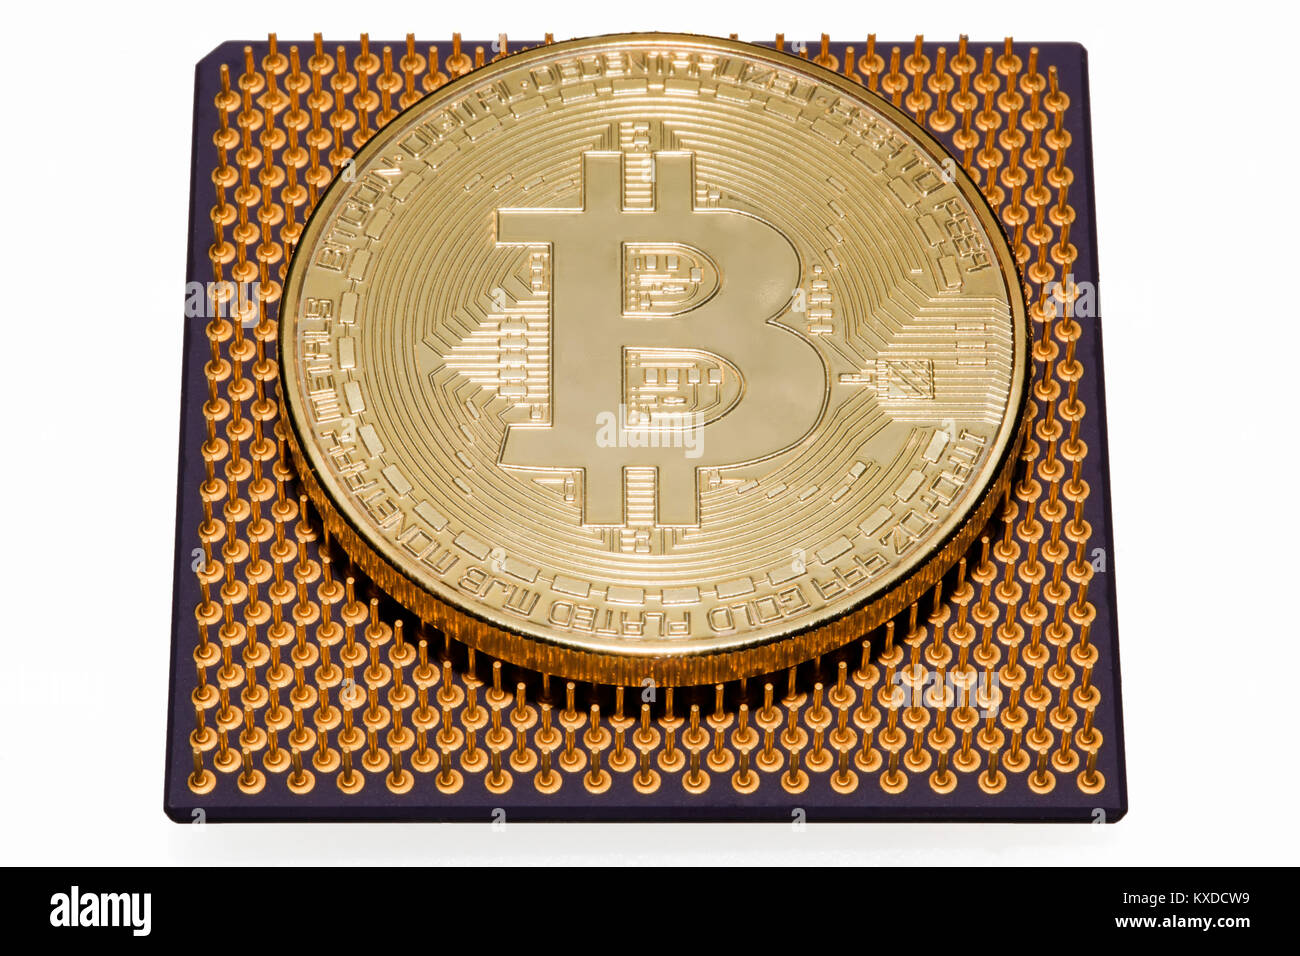 Bitcoin is on a processor Stock Photo